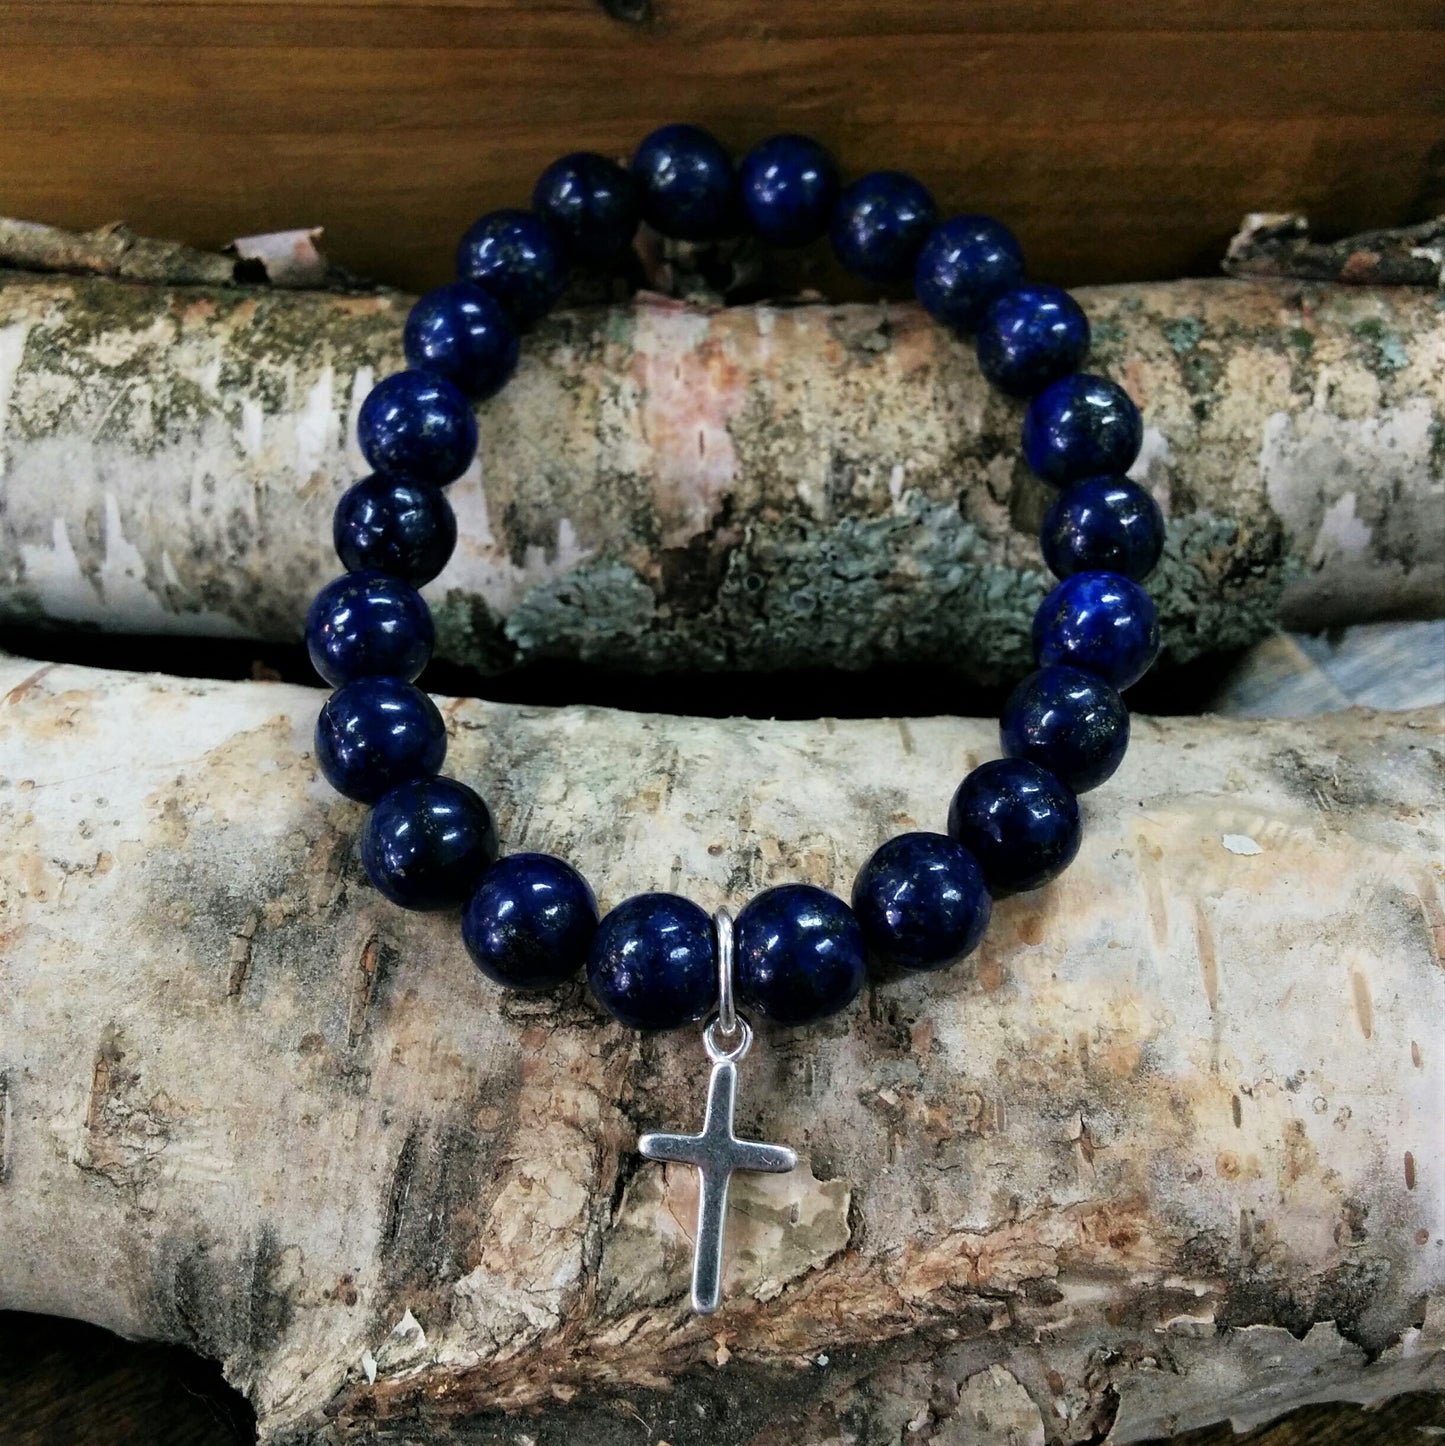 Stone Bracelet - Lapis Lazuli with choice of Sterling Silver Charm